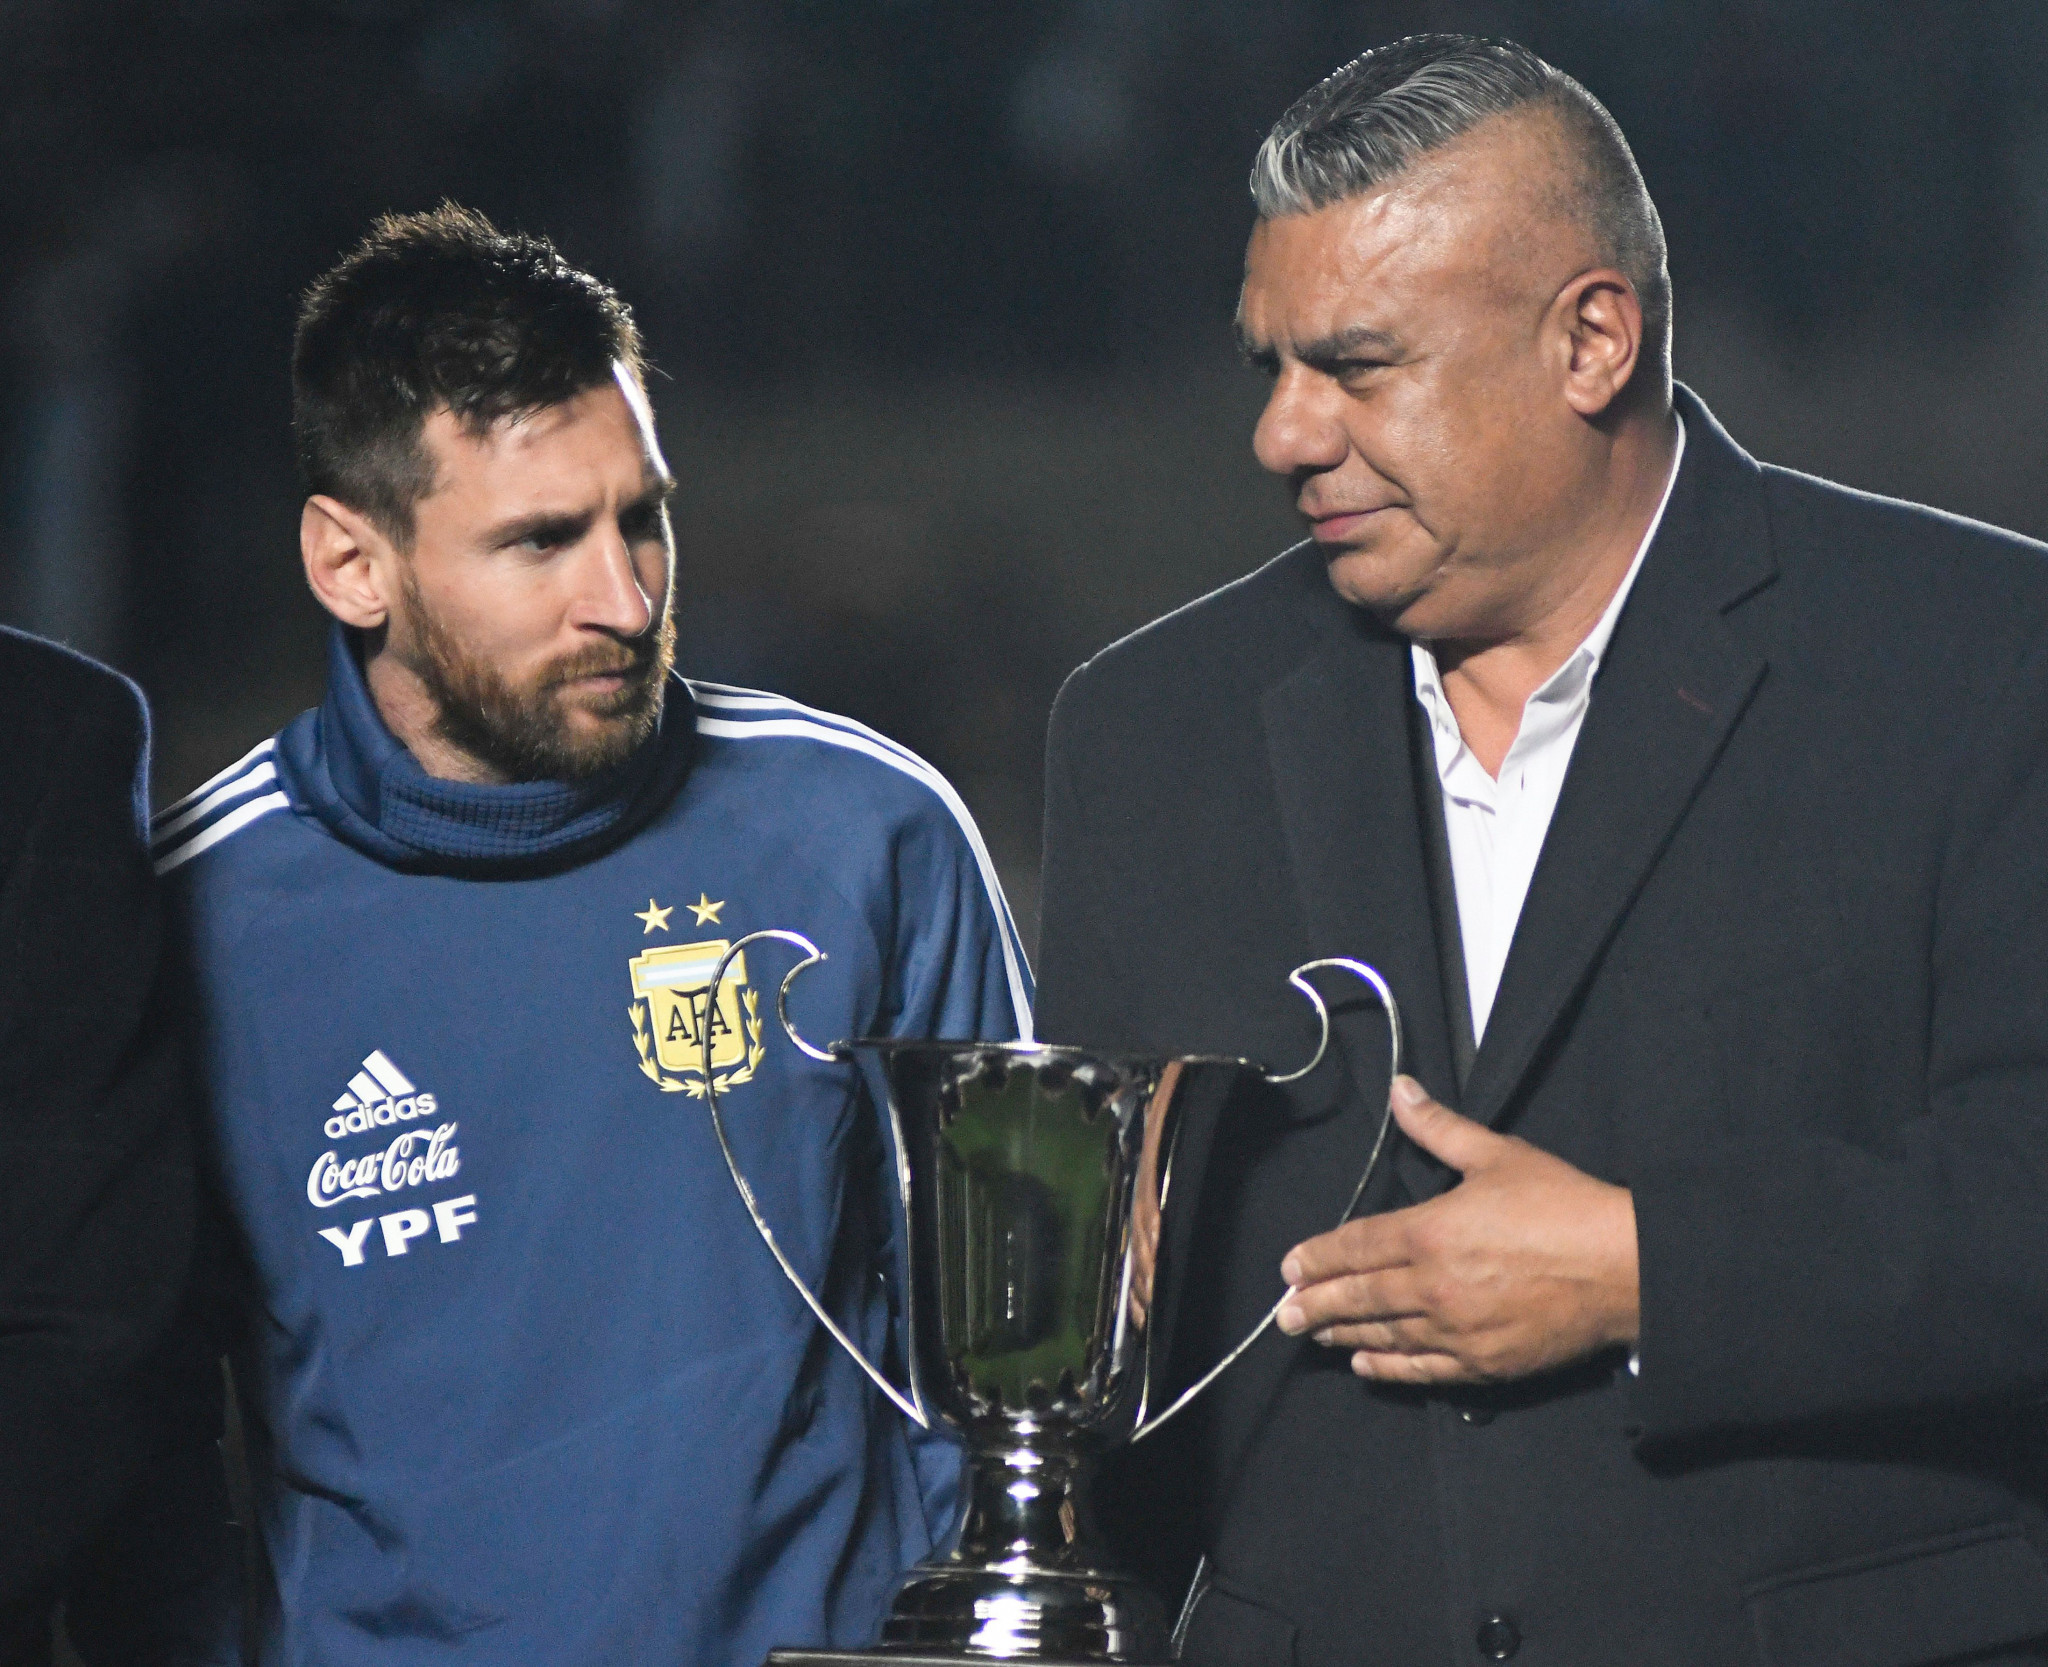 Like Lionel Messi, Claudio Tapia claimed that Argentina’s hopes of Copa América glory were shattered by biased refereeing decisions during their 2-0 semi-final loss to Brazil ©Getty Images